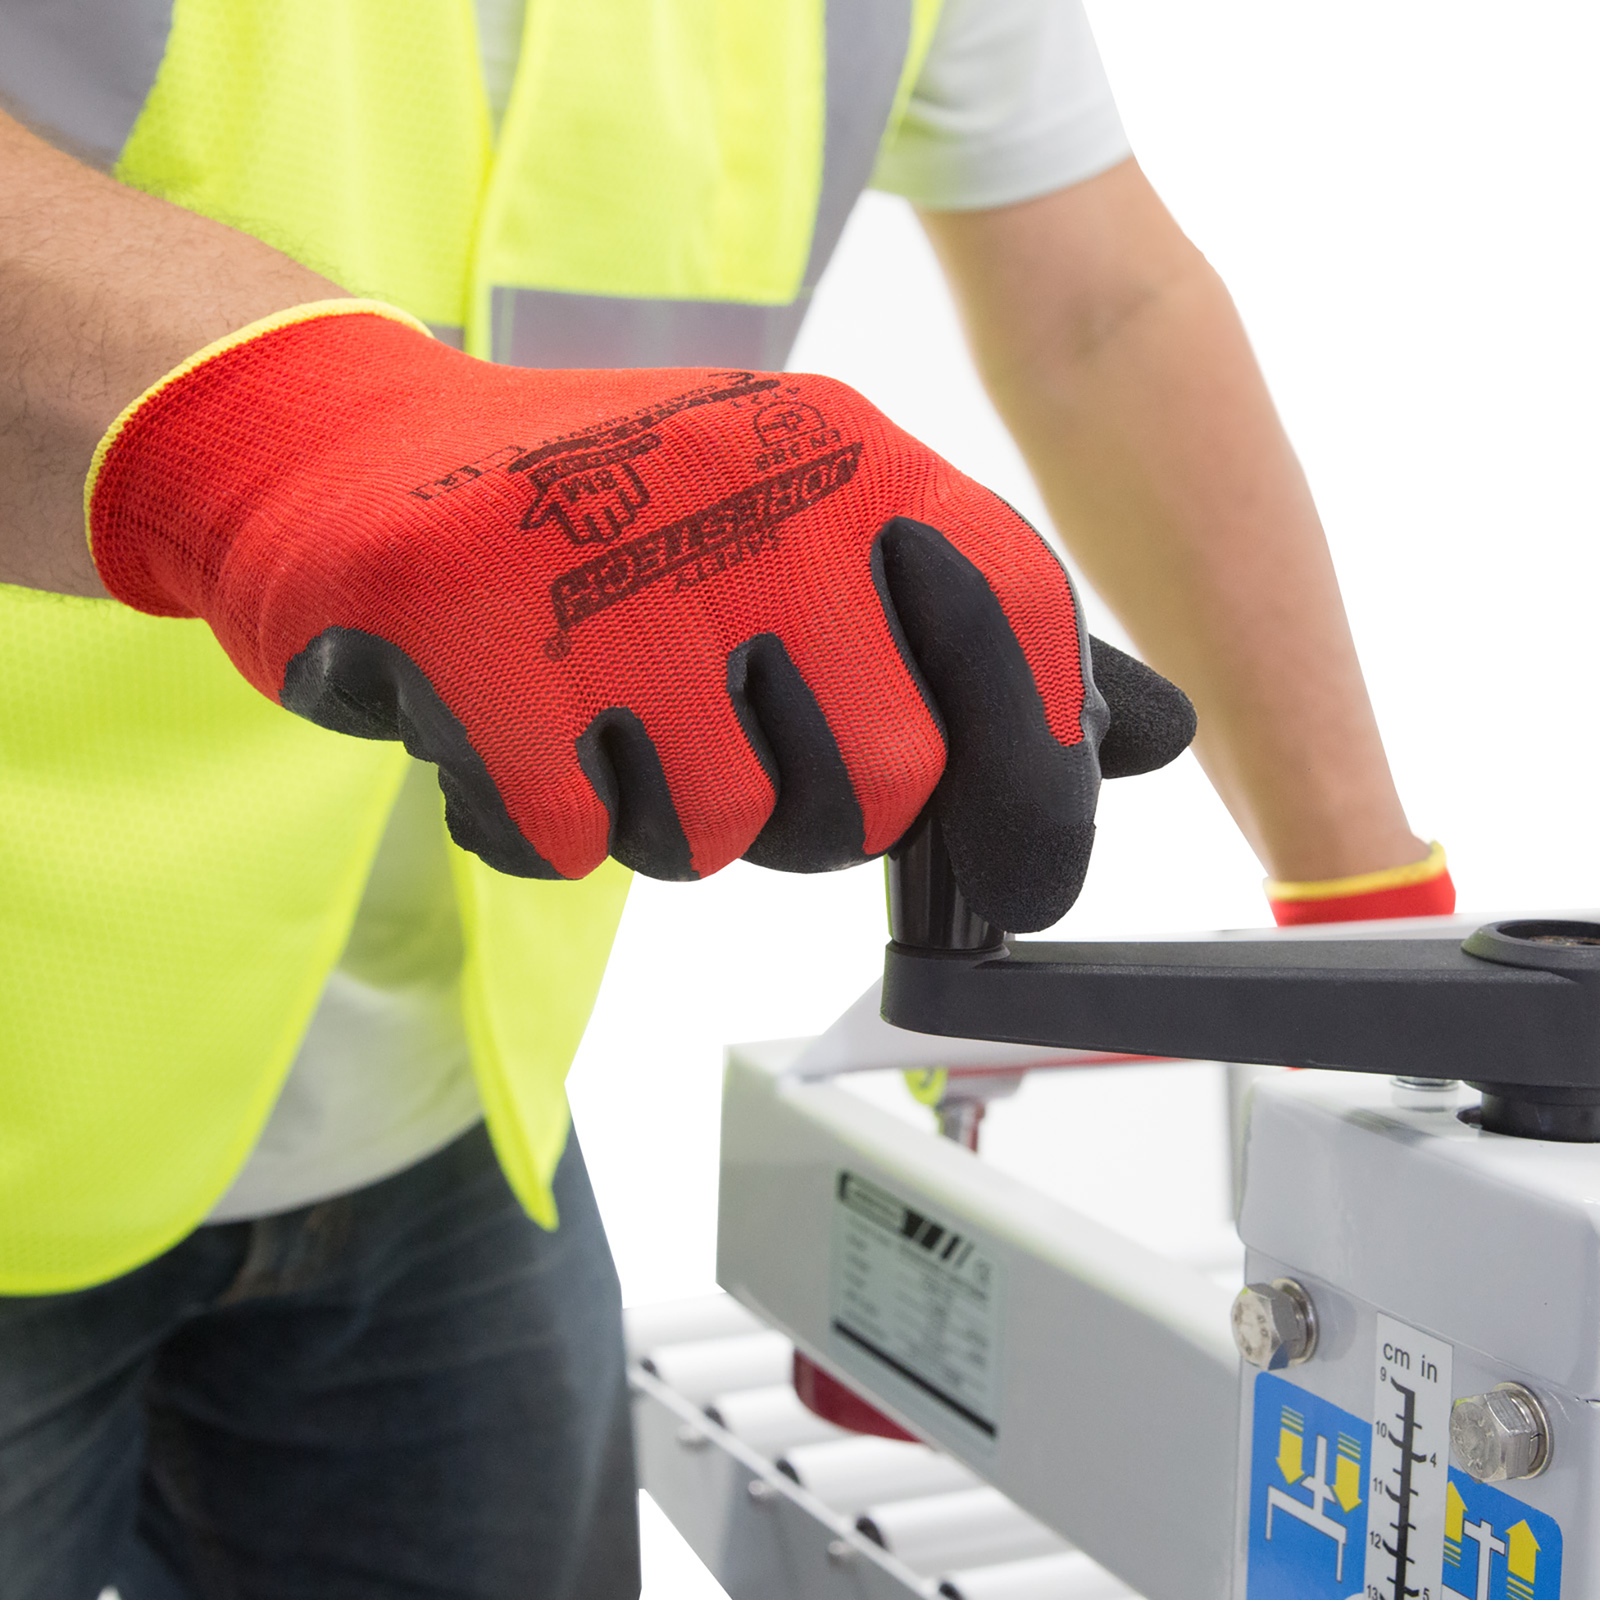 Worker wearing PPE and the JORESTECH red and black safety work gloves with latex dipped palms for mechanical work 